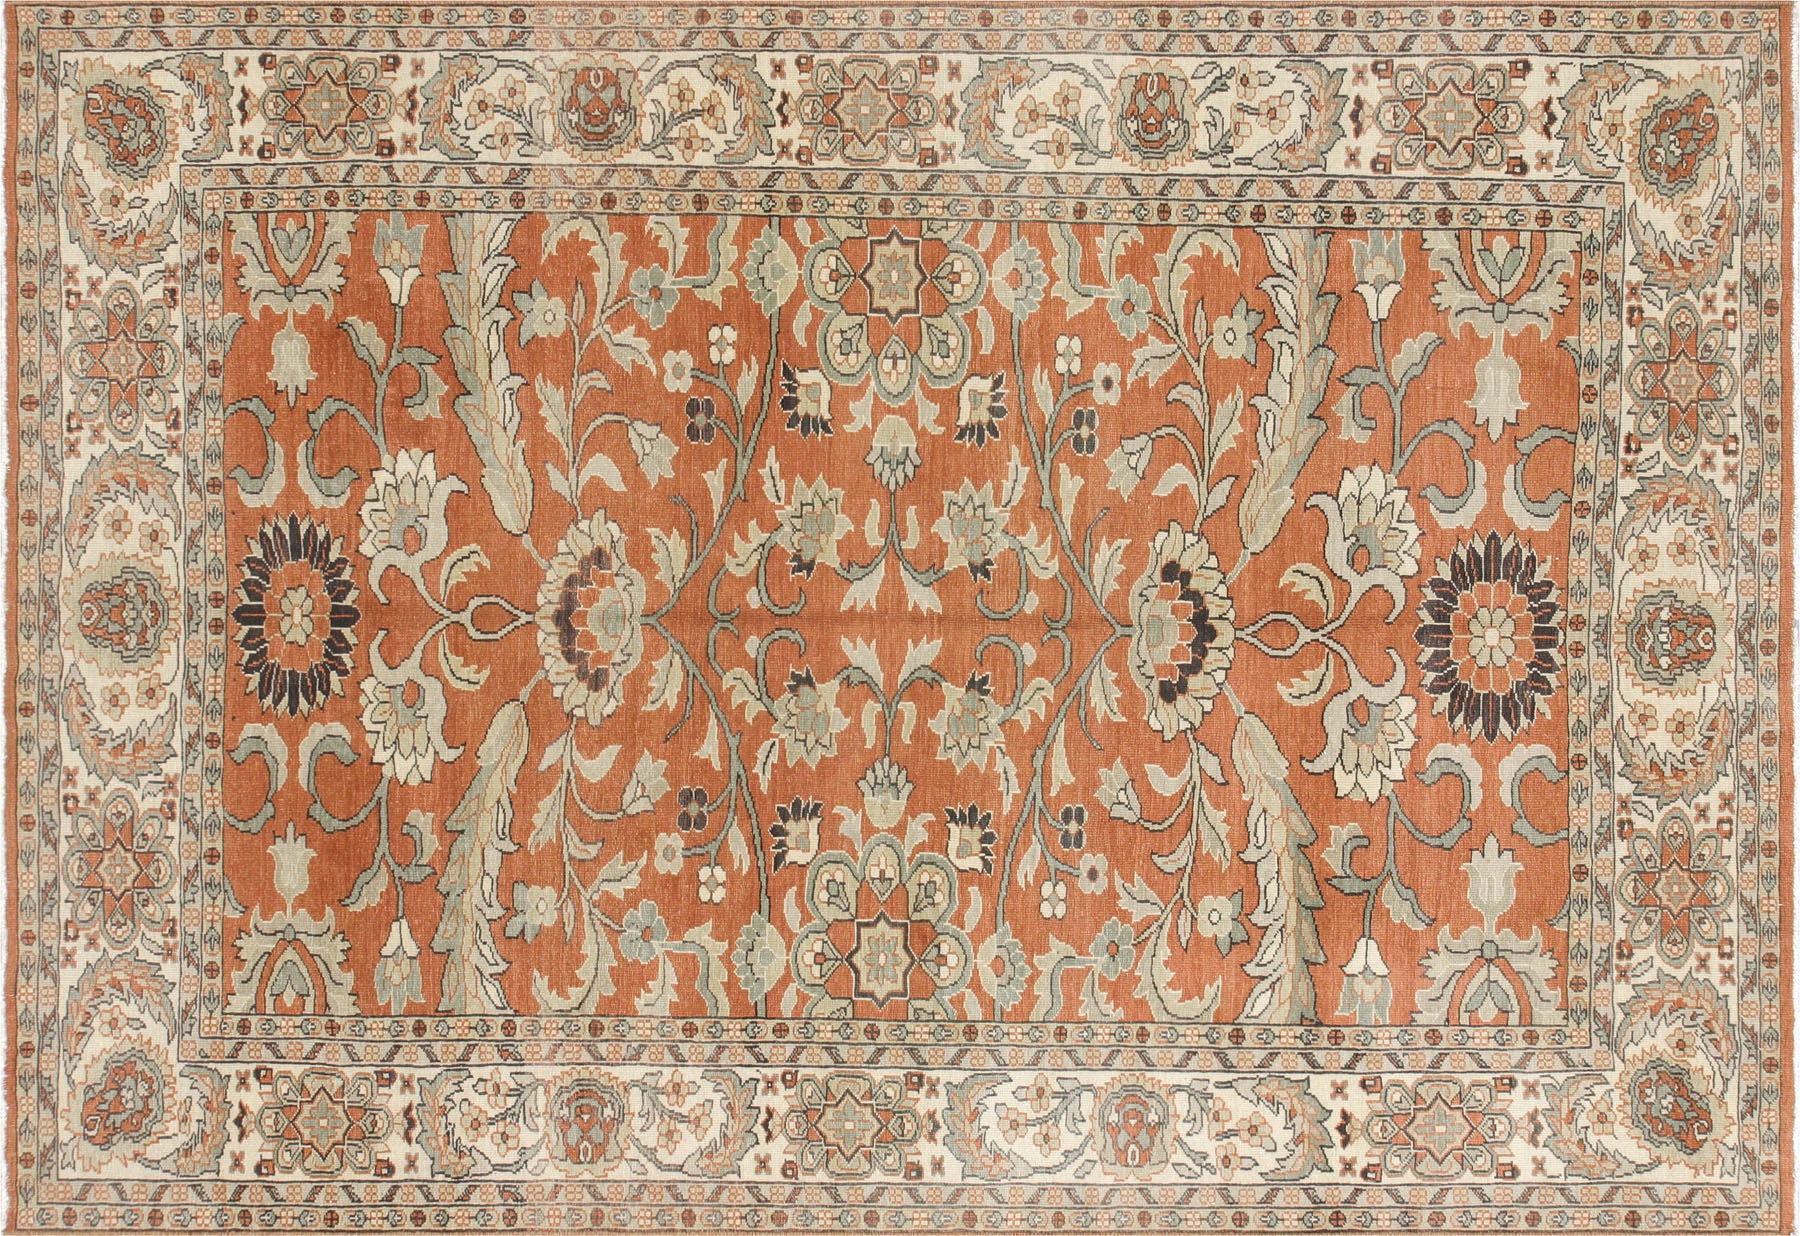 Recently Woven Egyptian Sultanabad Rug - 6'1" x 8'9"